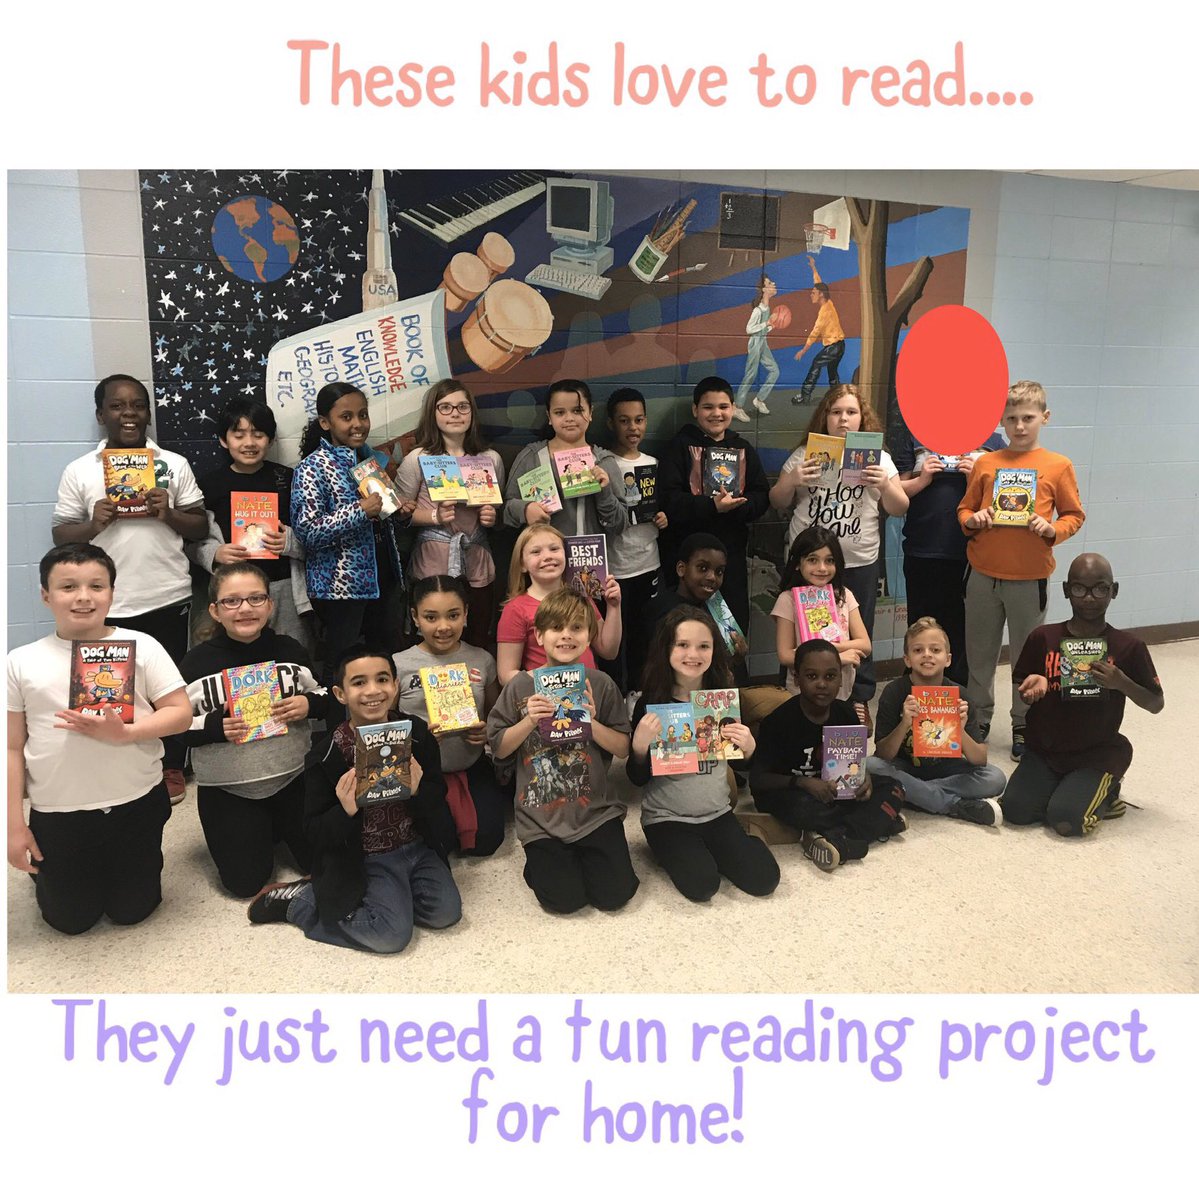 A fun #readingproject for kids at home is a T-shirt book report. They have to have title, author, setting, summary, characters & images that would go with the book then wear it to school when we get back @amyfitz74 @ksnsln @teachyourheartoutcon @riseupfoundation @alaneadamsbooks